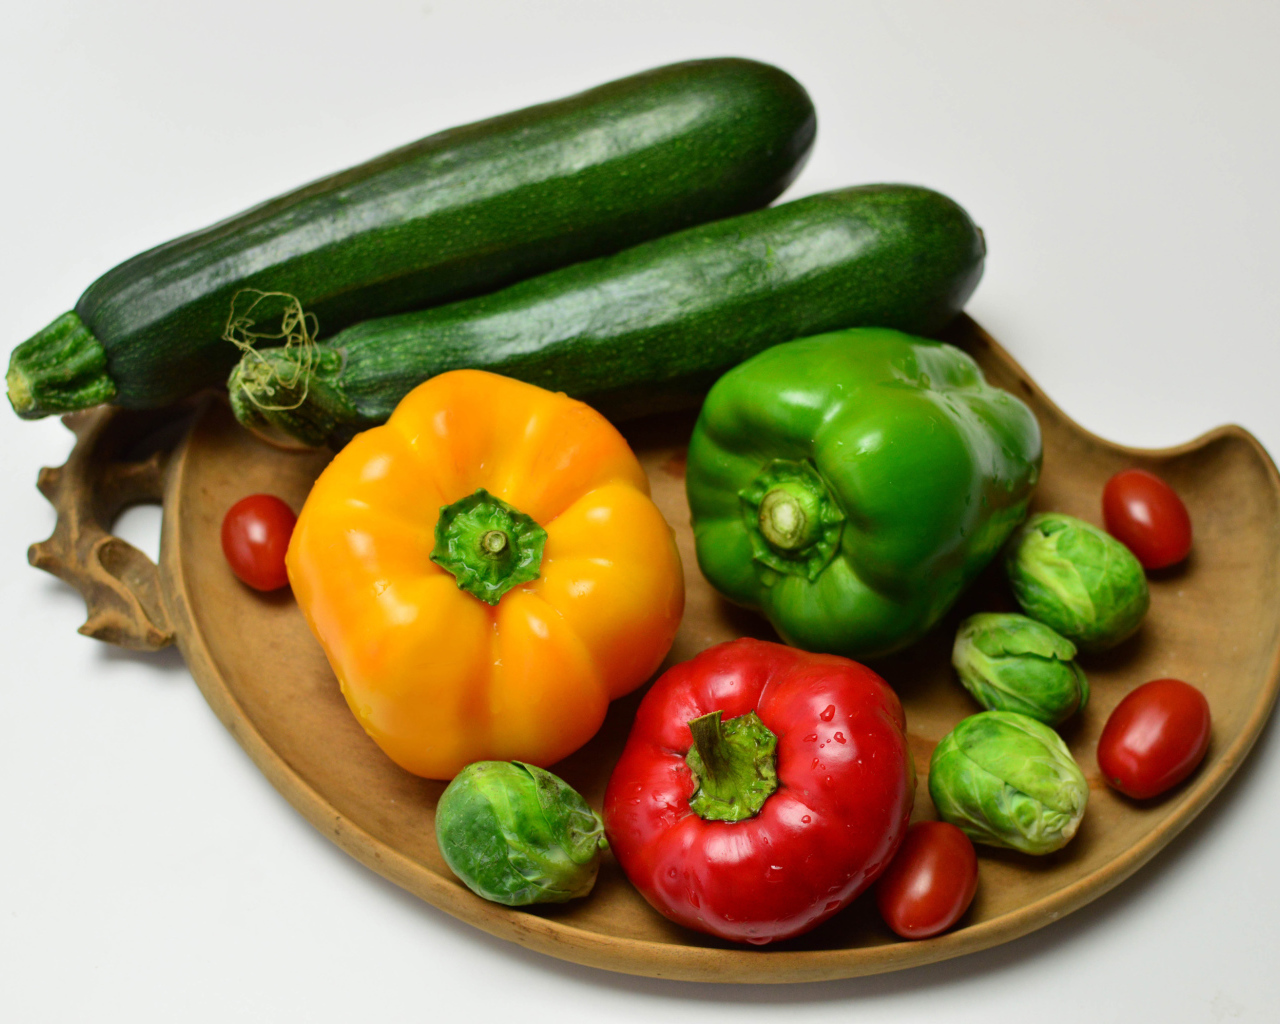 Sweet pepper, zucchini, tomatoes and brussels sprouts on a gray background